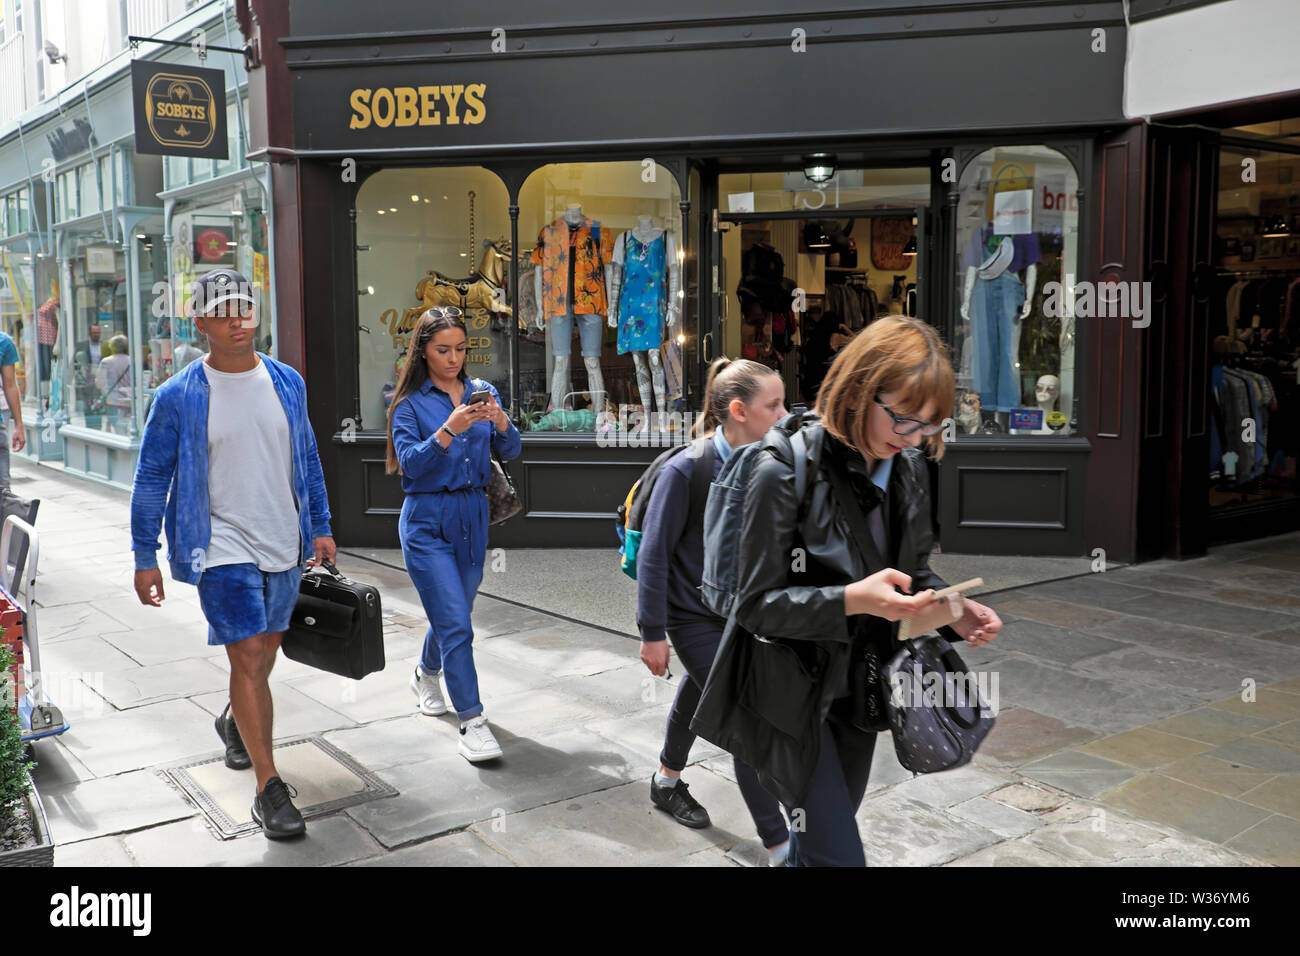 Exterior view of young people walking outside the entrance to Sobeys vintage clothing store in Royal Arcade Cardiff Wales UK  KATHY DEWITT Stock Photo